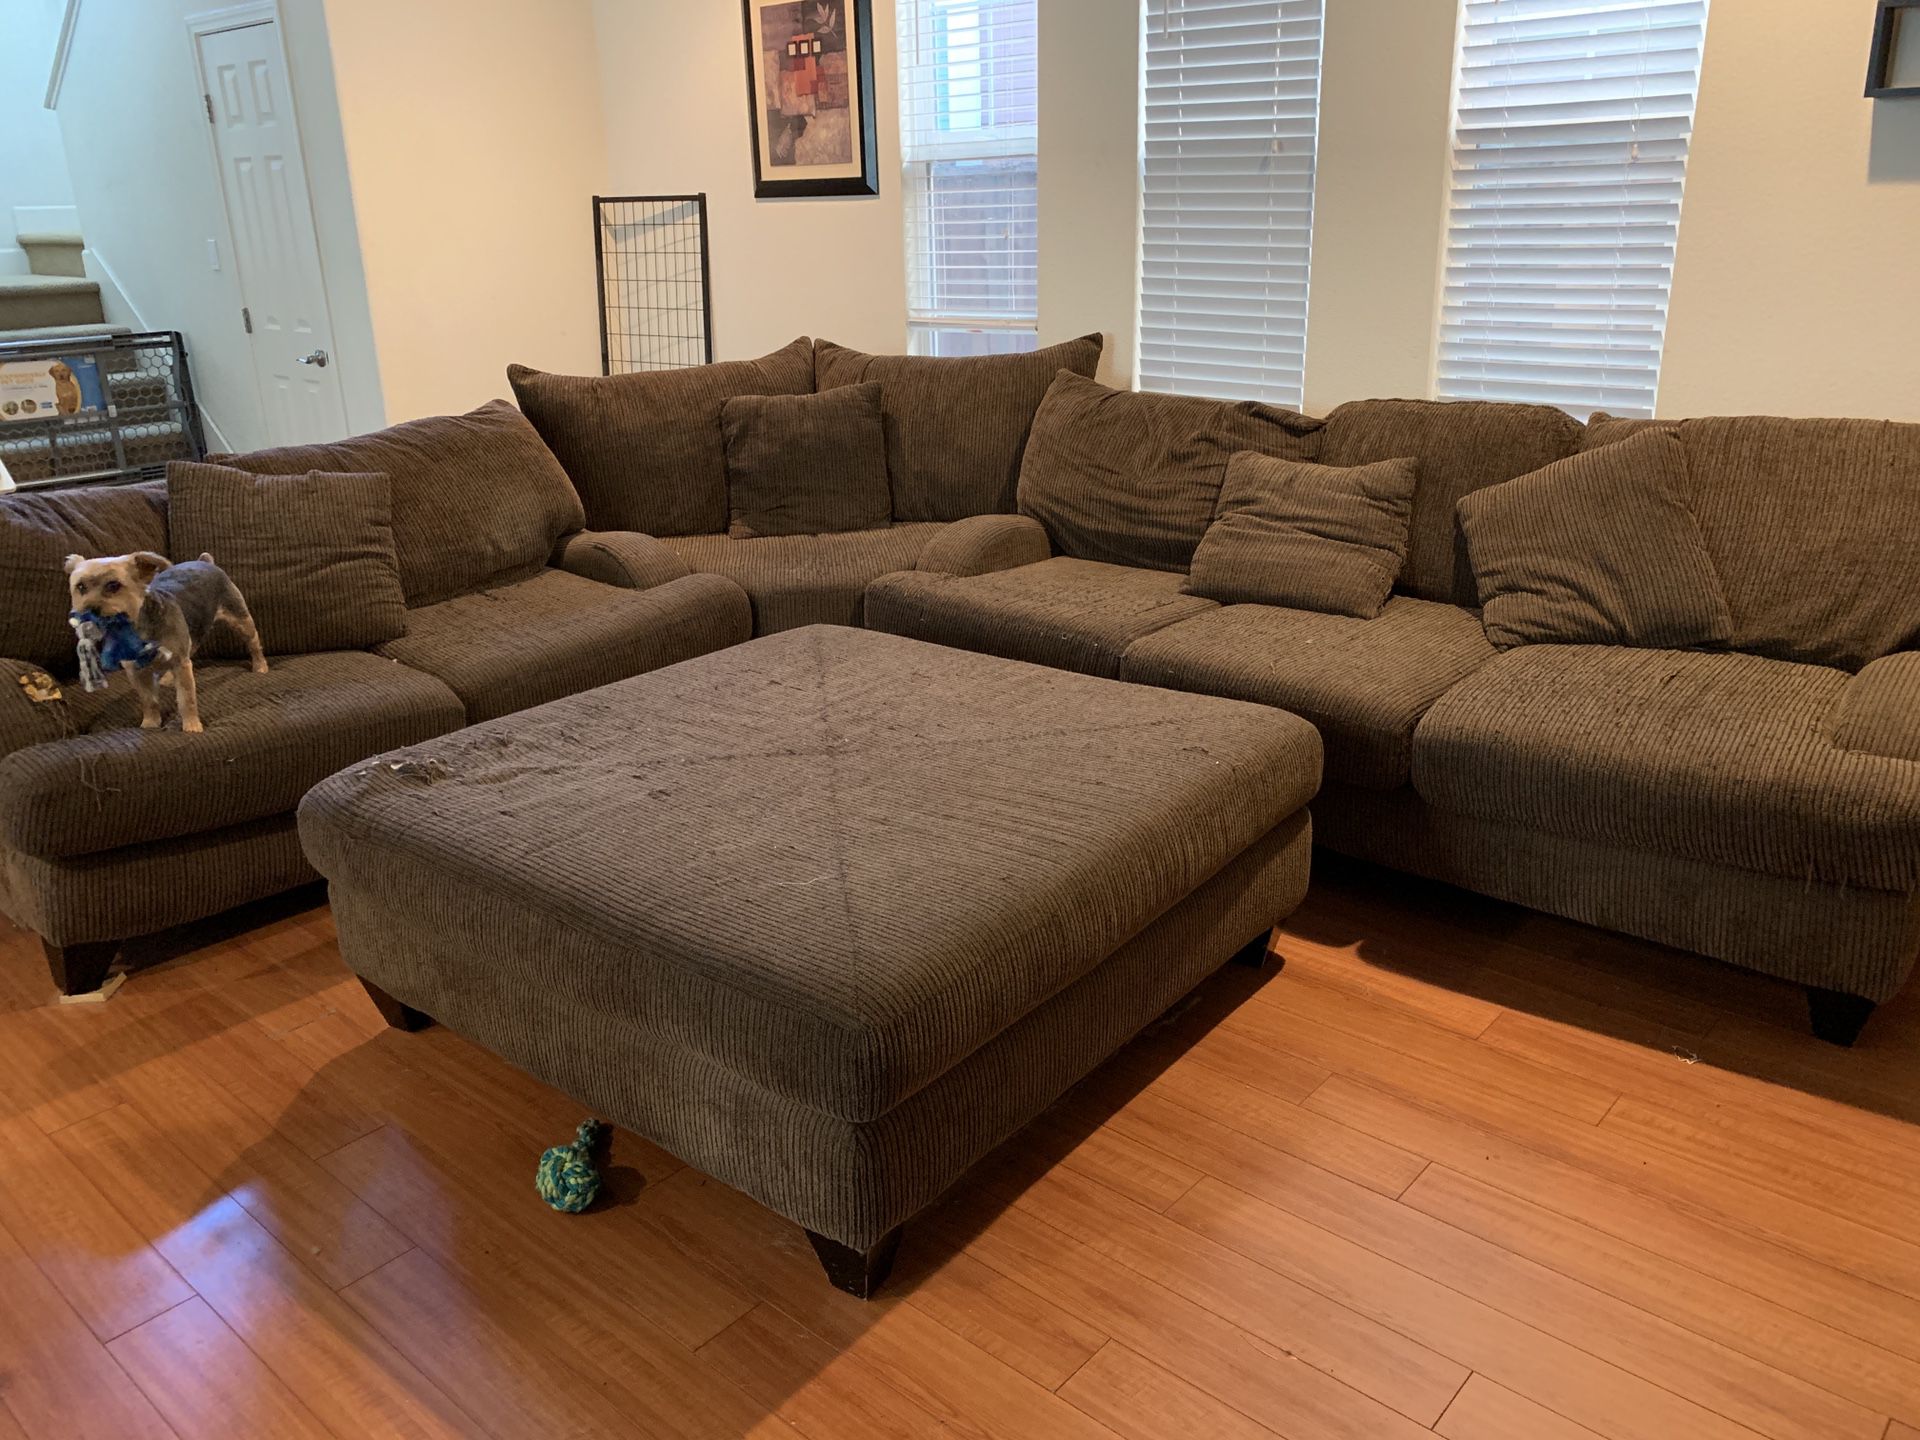 Huge sectional couch!